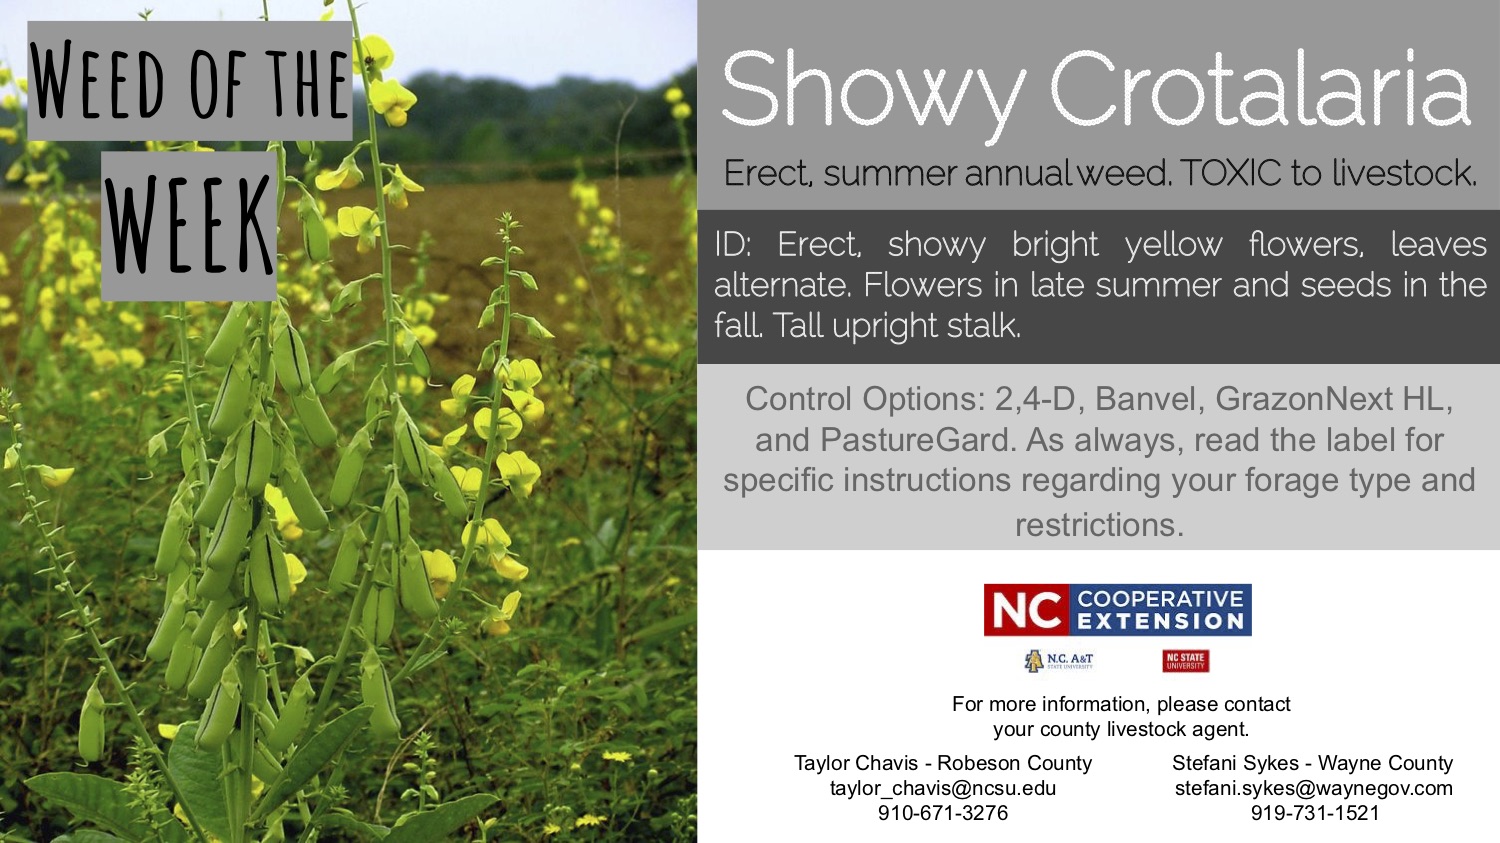 Information on the weed Snowy Crotalaria